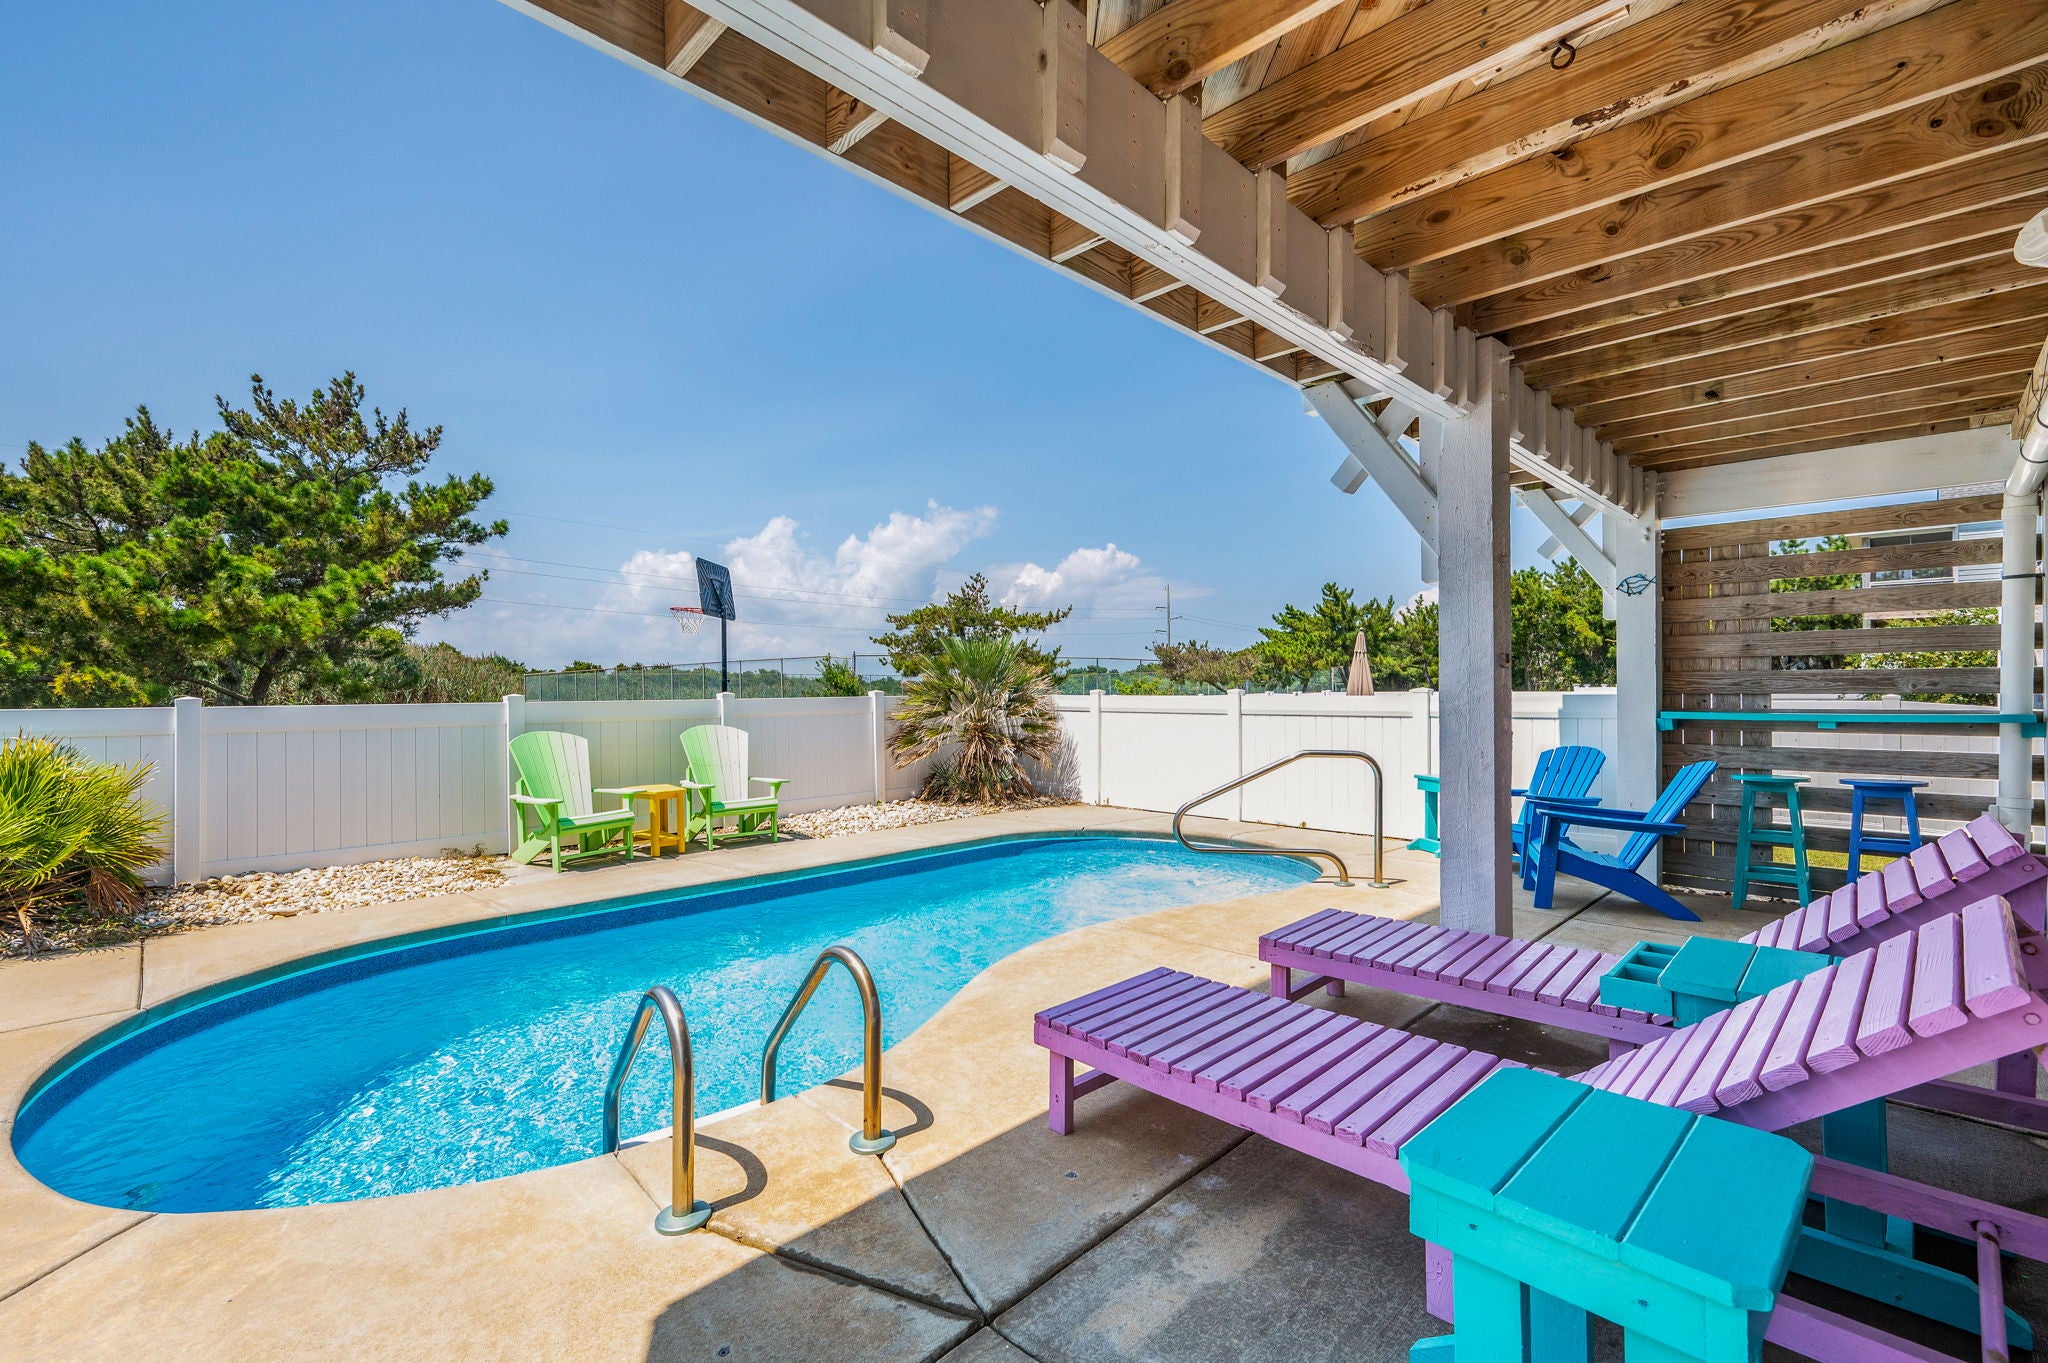 SN218: Sand Castle Cottage | Private Pool Area